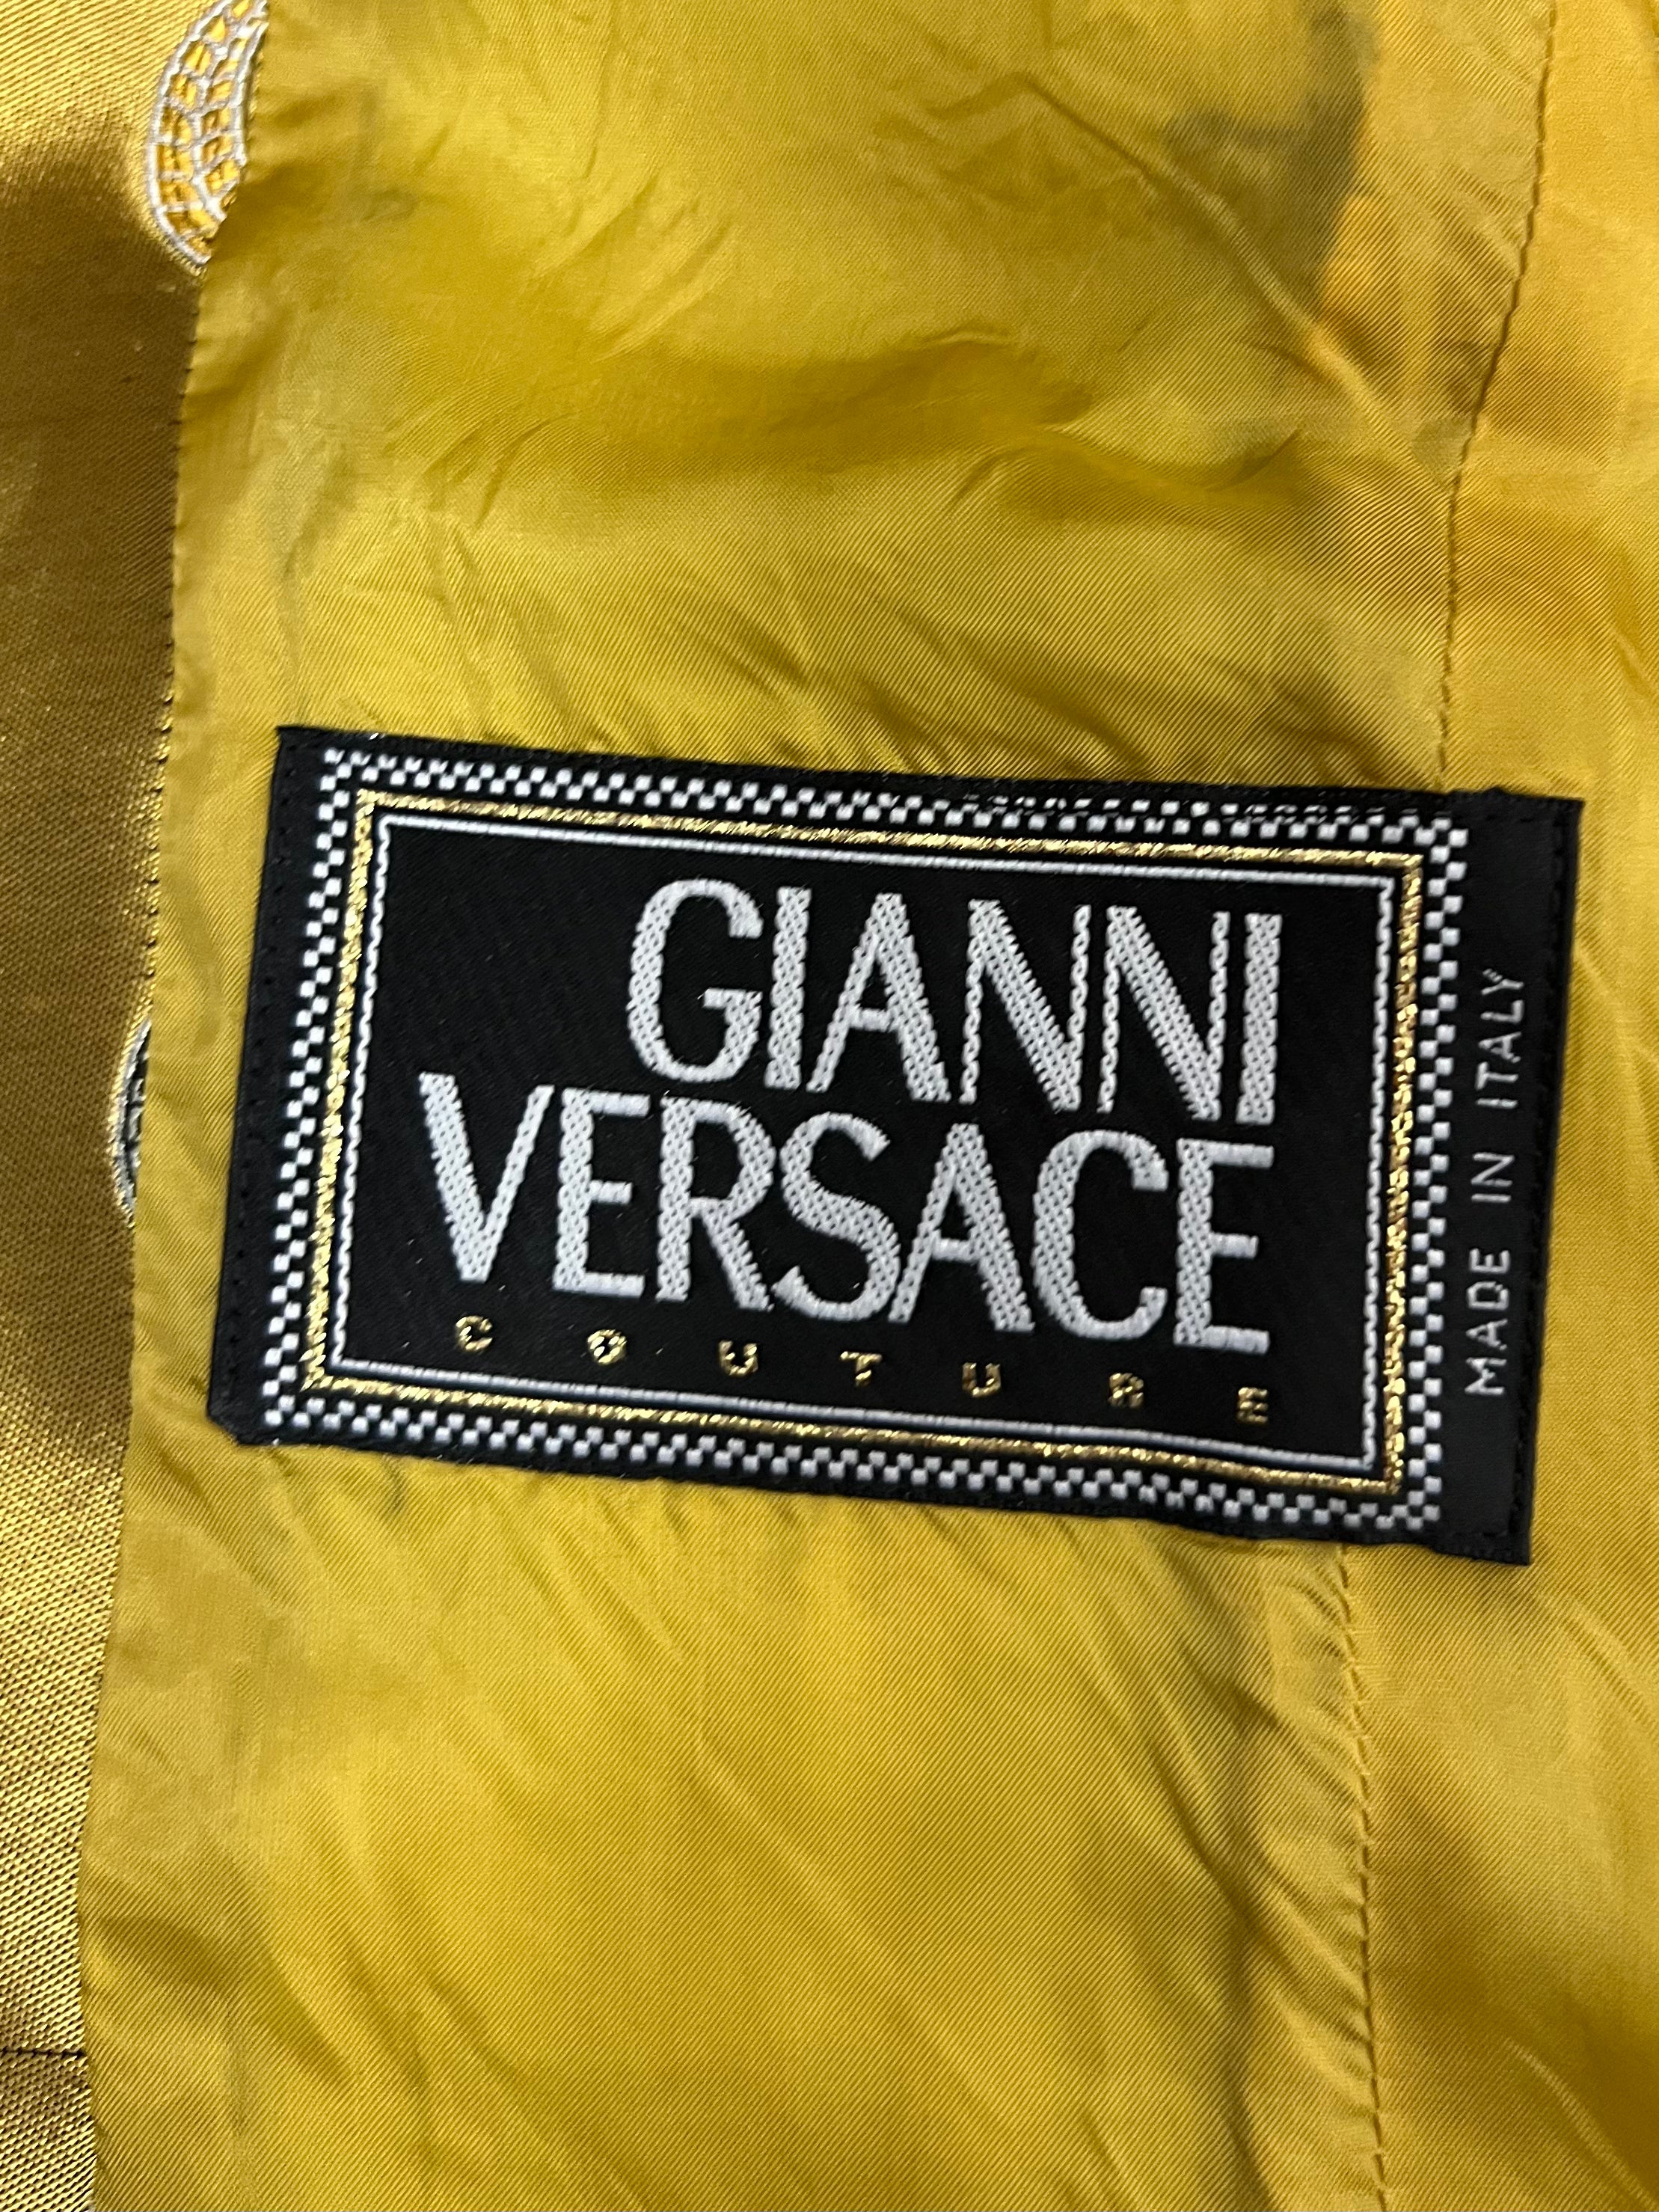 Gianni Versace Fall 1997 Golden Coin Print Suit